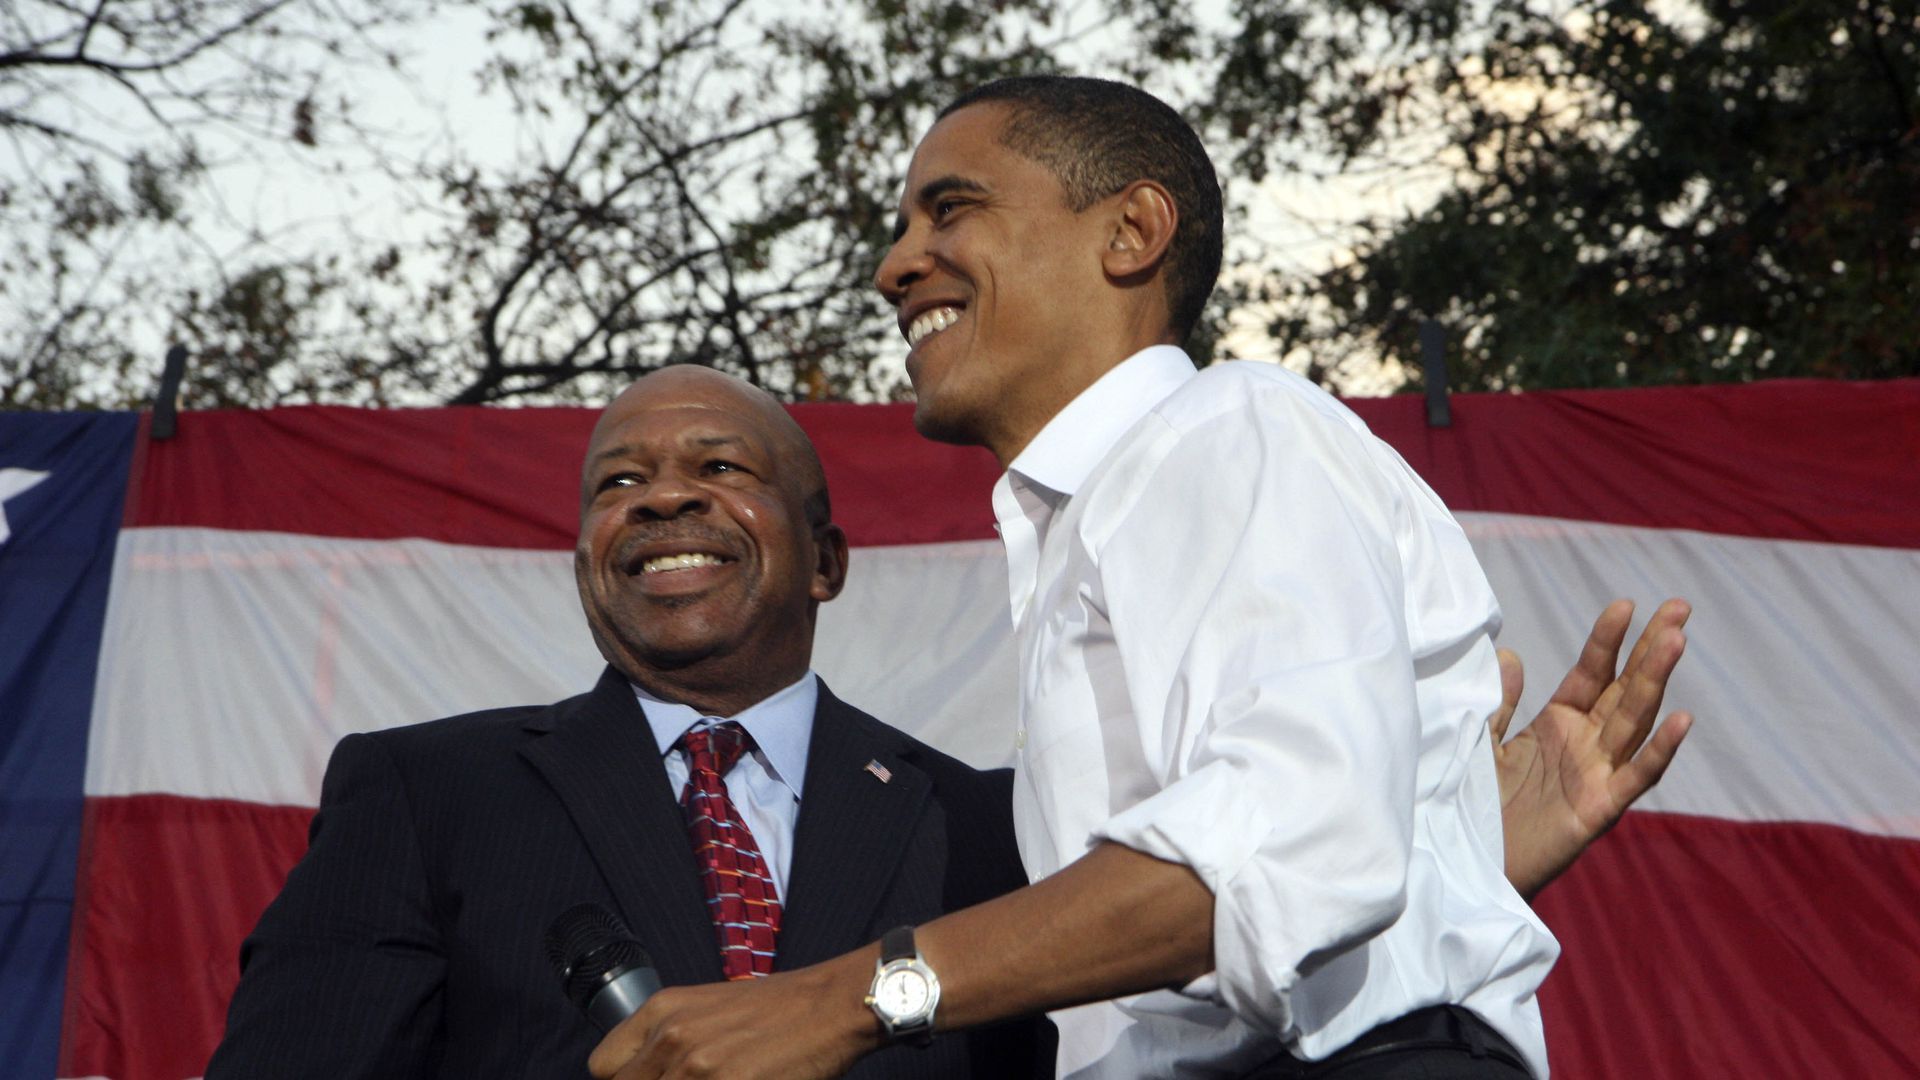 Cummings with then-candidate Barack Obama.